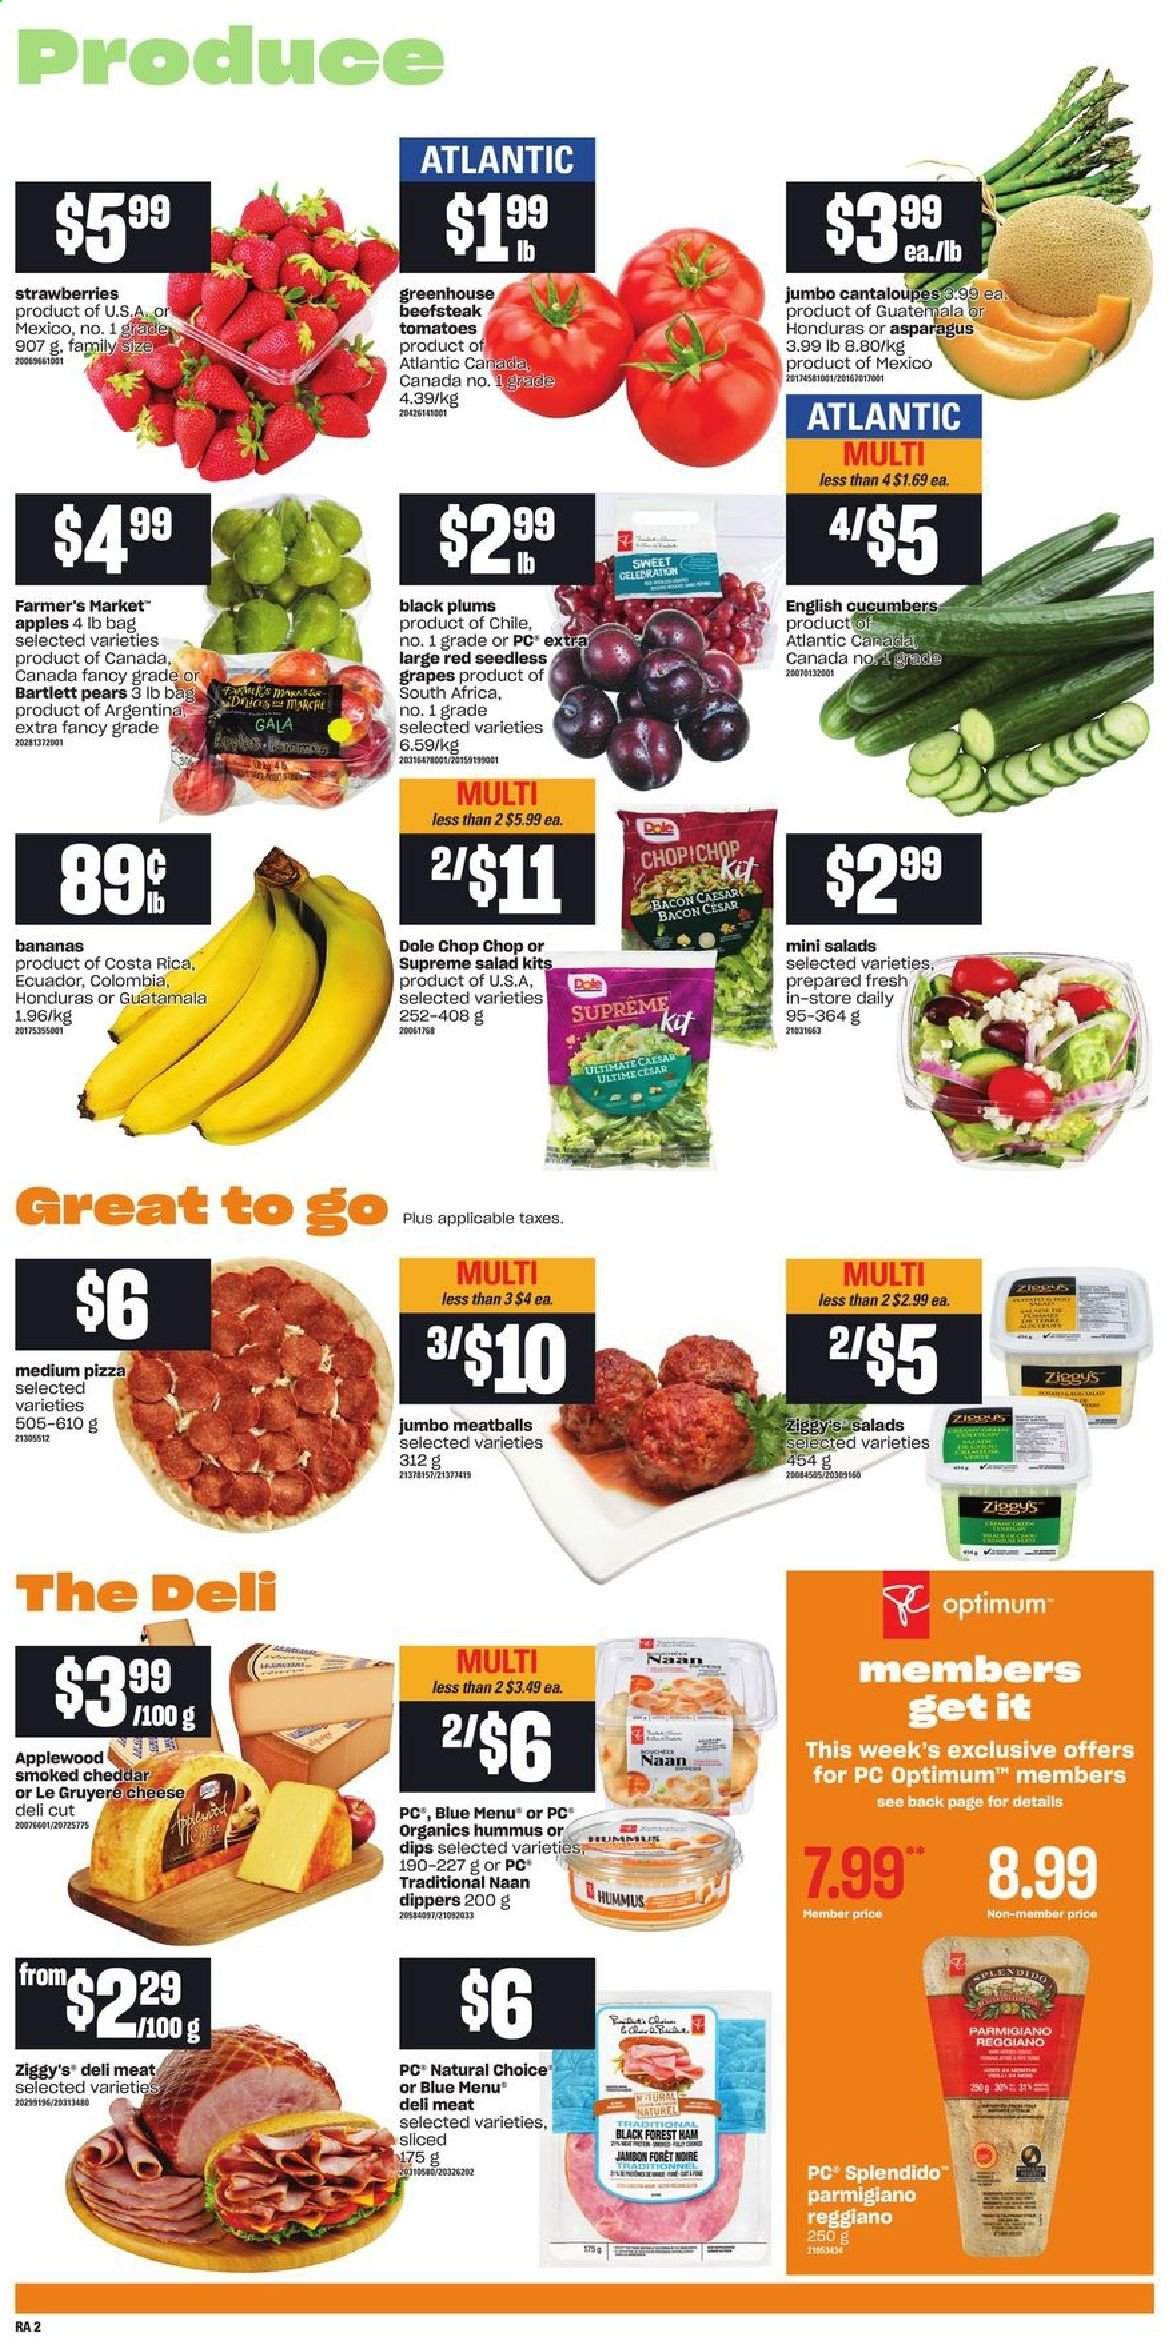 thumbnail - Atlantic Superstore Flyer - April 15, 2021 - April 21, 2021 - Sales products - asparagus, cantaloupe, cucumber, salad, Dole, apples, bananas, Bartlett pears, Gala, grapes, seedless grapes, strawberries, plums, pears, black plums, pizza, meatballs, bacon, ham, hummus, Gruyere, cheddar, Parmigiano Reggiano, bag, Optimum. Page 3.